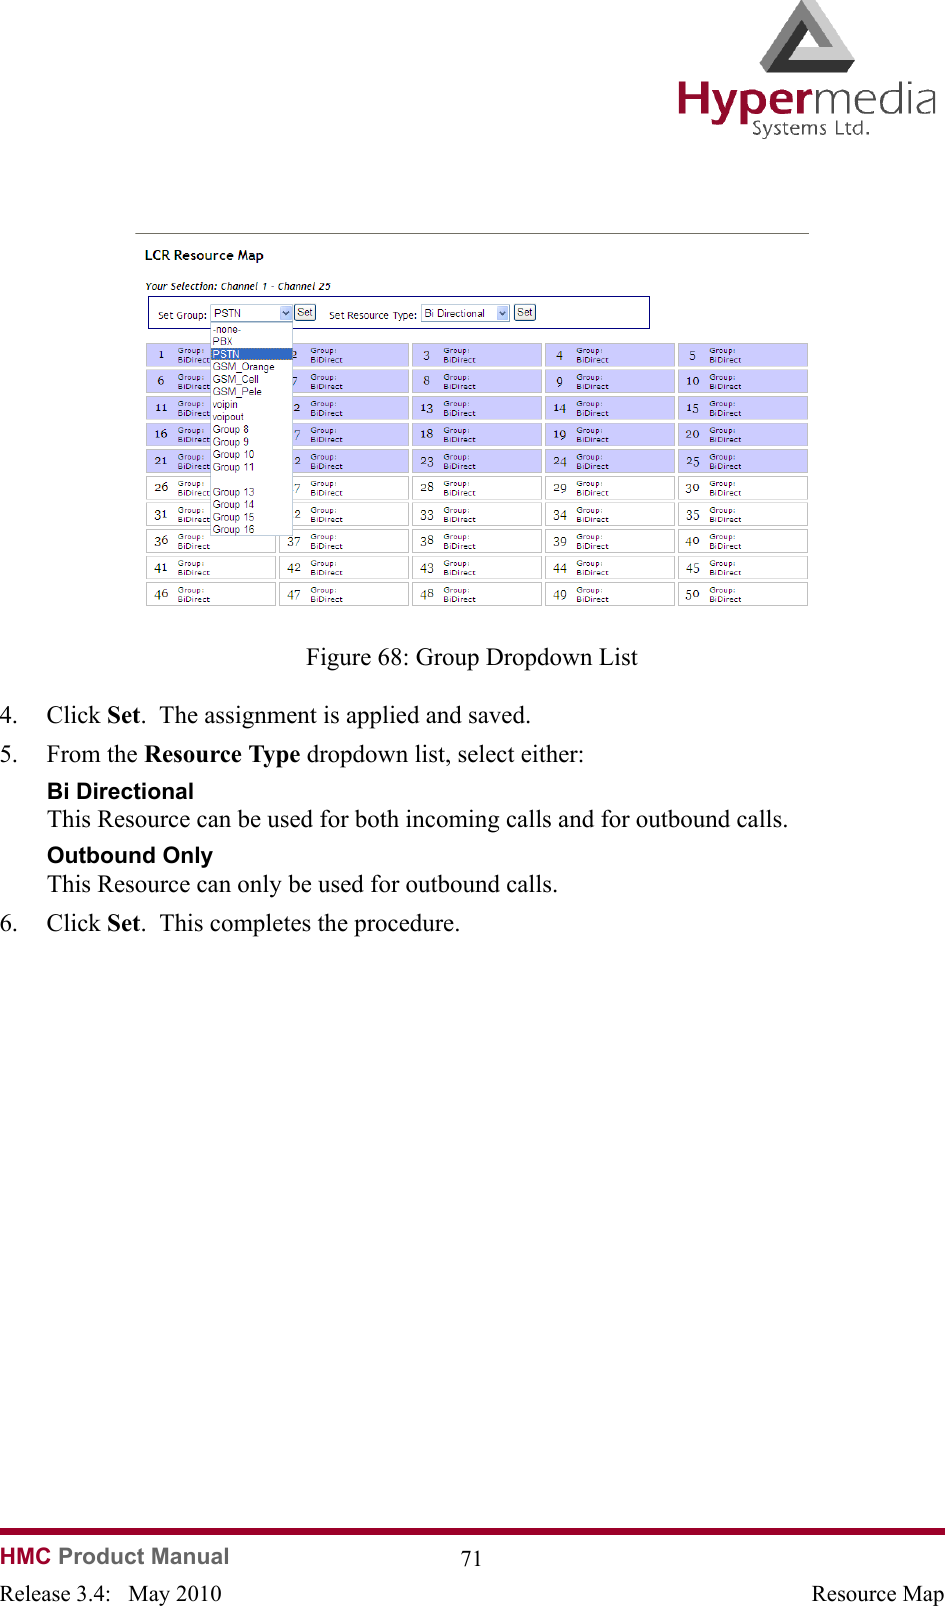 HMC Product Manual  71Release 3.4:   May 2010 Resource Map              Figure 68: Group Dropdown List4. Click Set.  The assignment is applied and saved.5. From the Resource Type dropdown list, select either:Bi Directional This Resource can be used for both incoming calls and for outbound calls.Outbound Only This Resource can only be used for outbound calls.6. Click Set.  This completes the procedure.